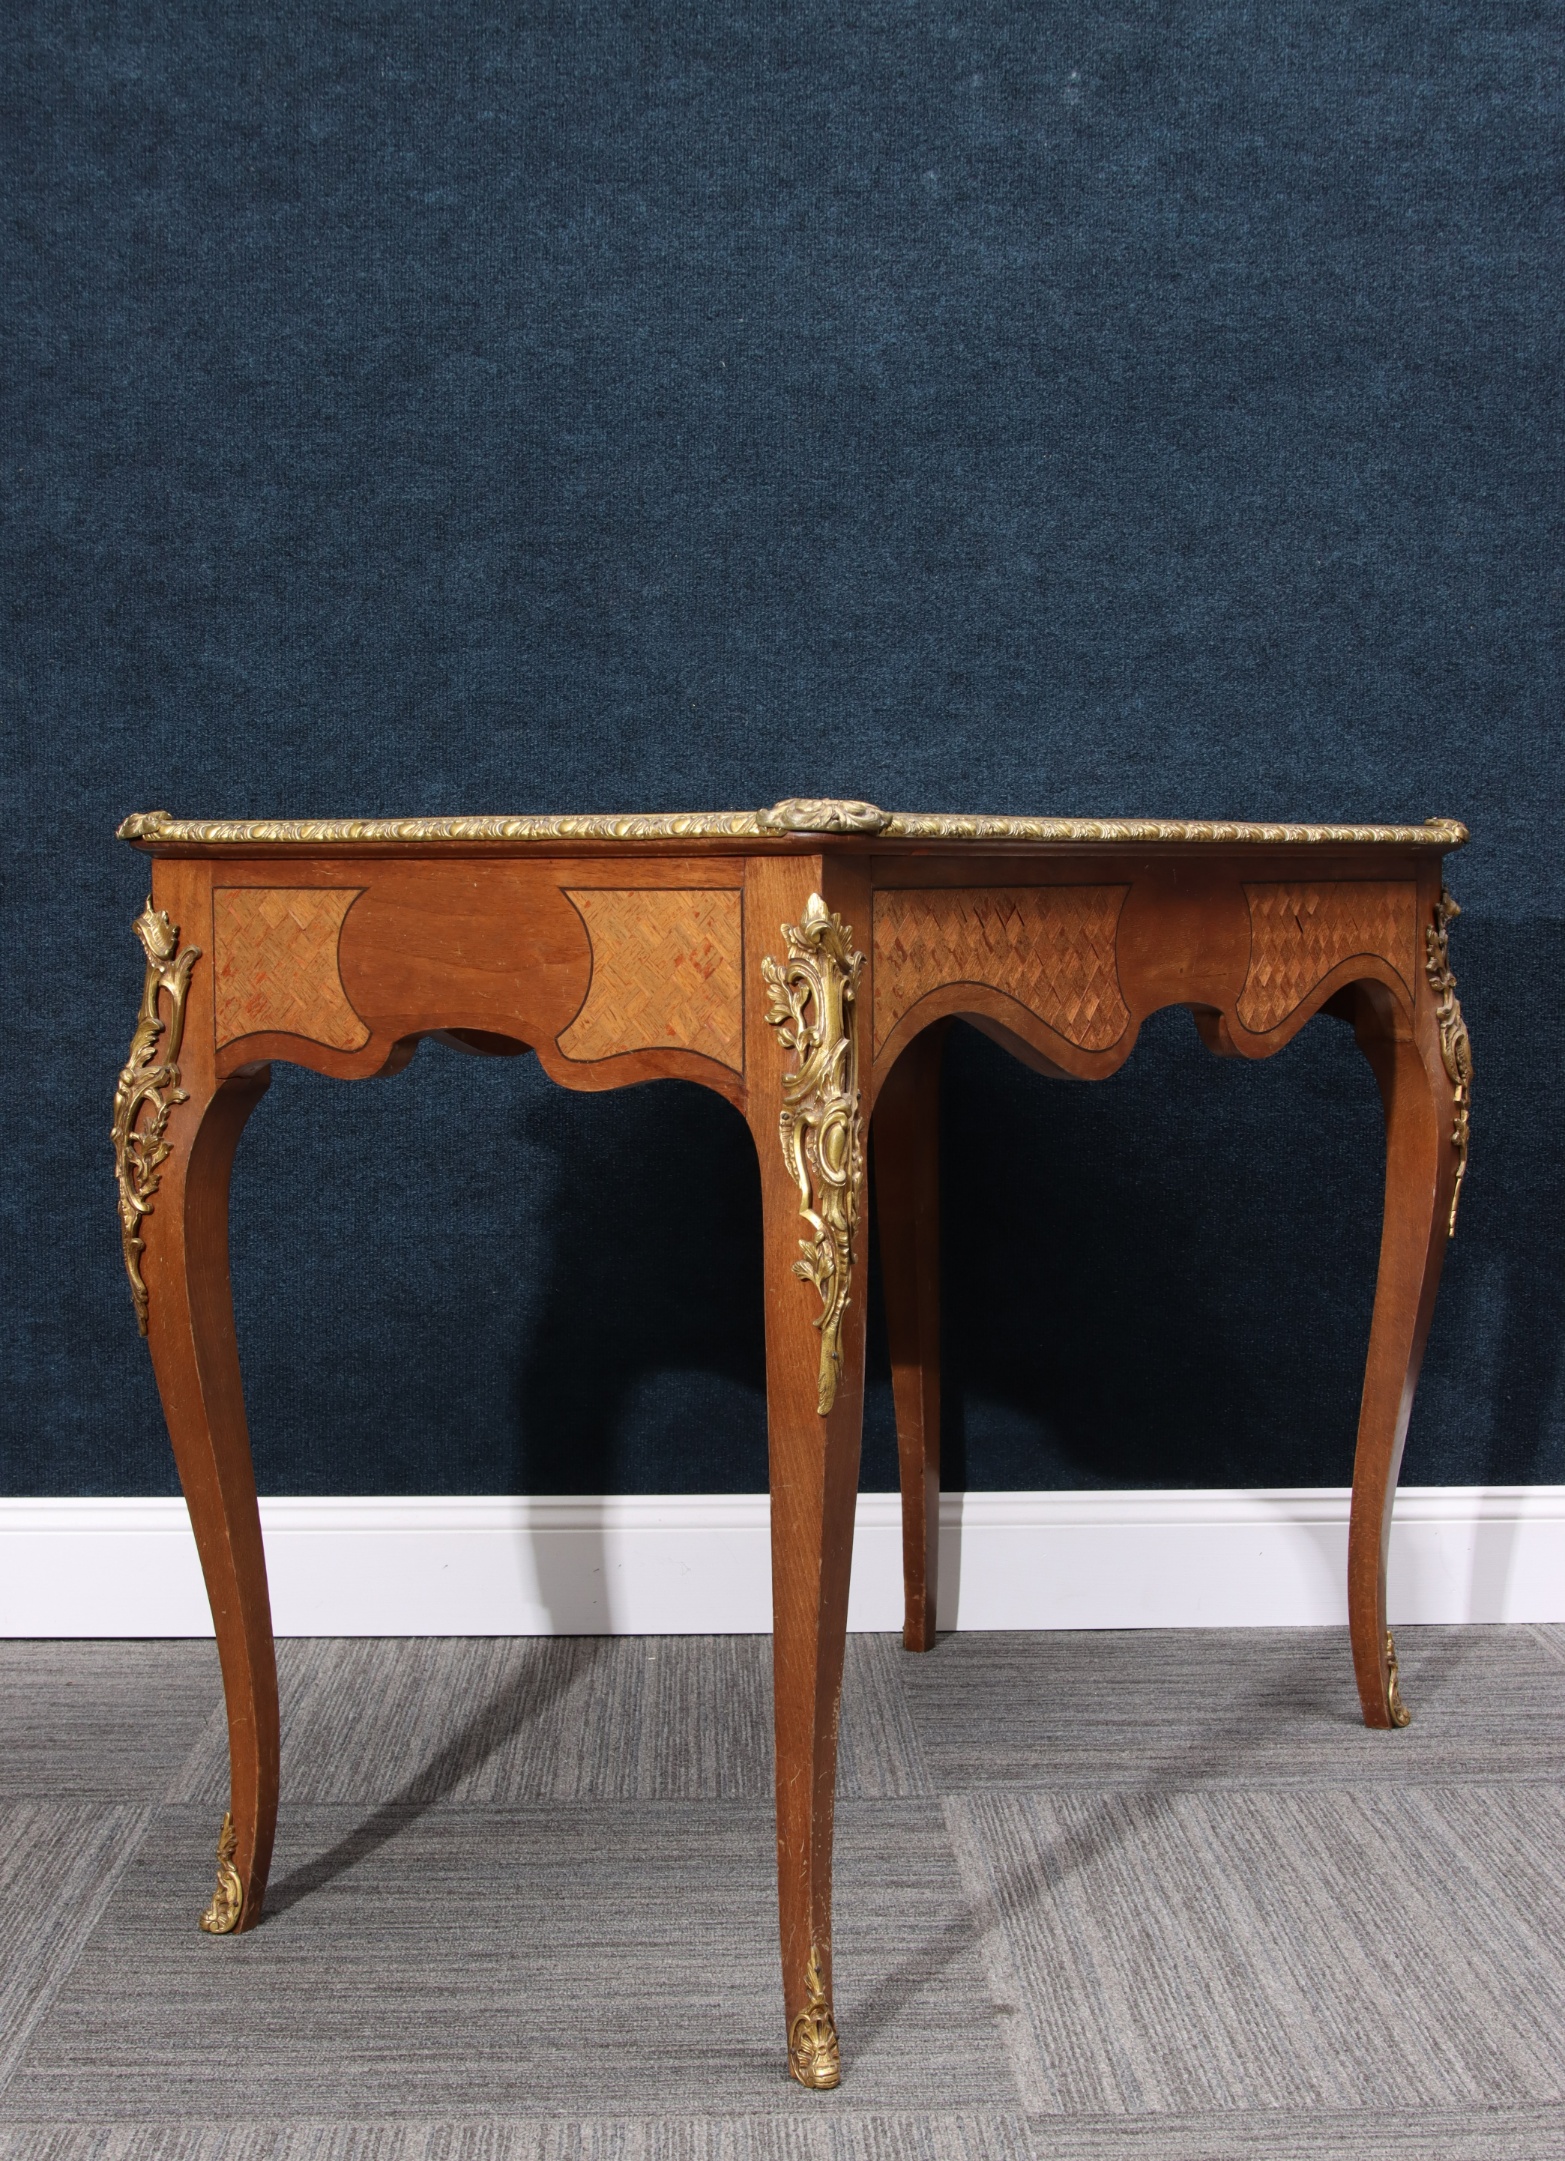 Antique French Louis XV Style Desk - Image 2 of 8